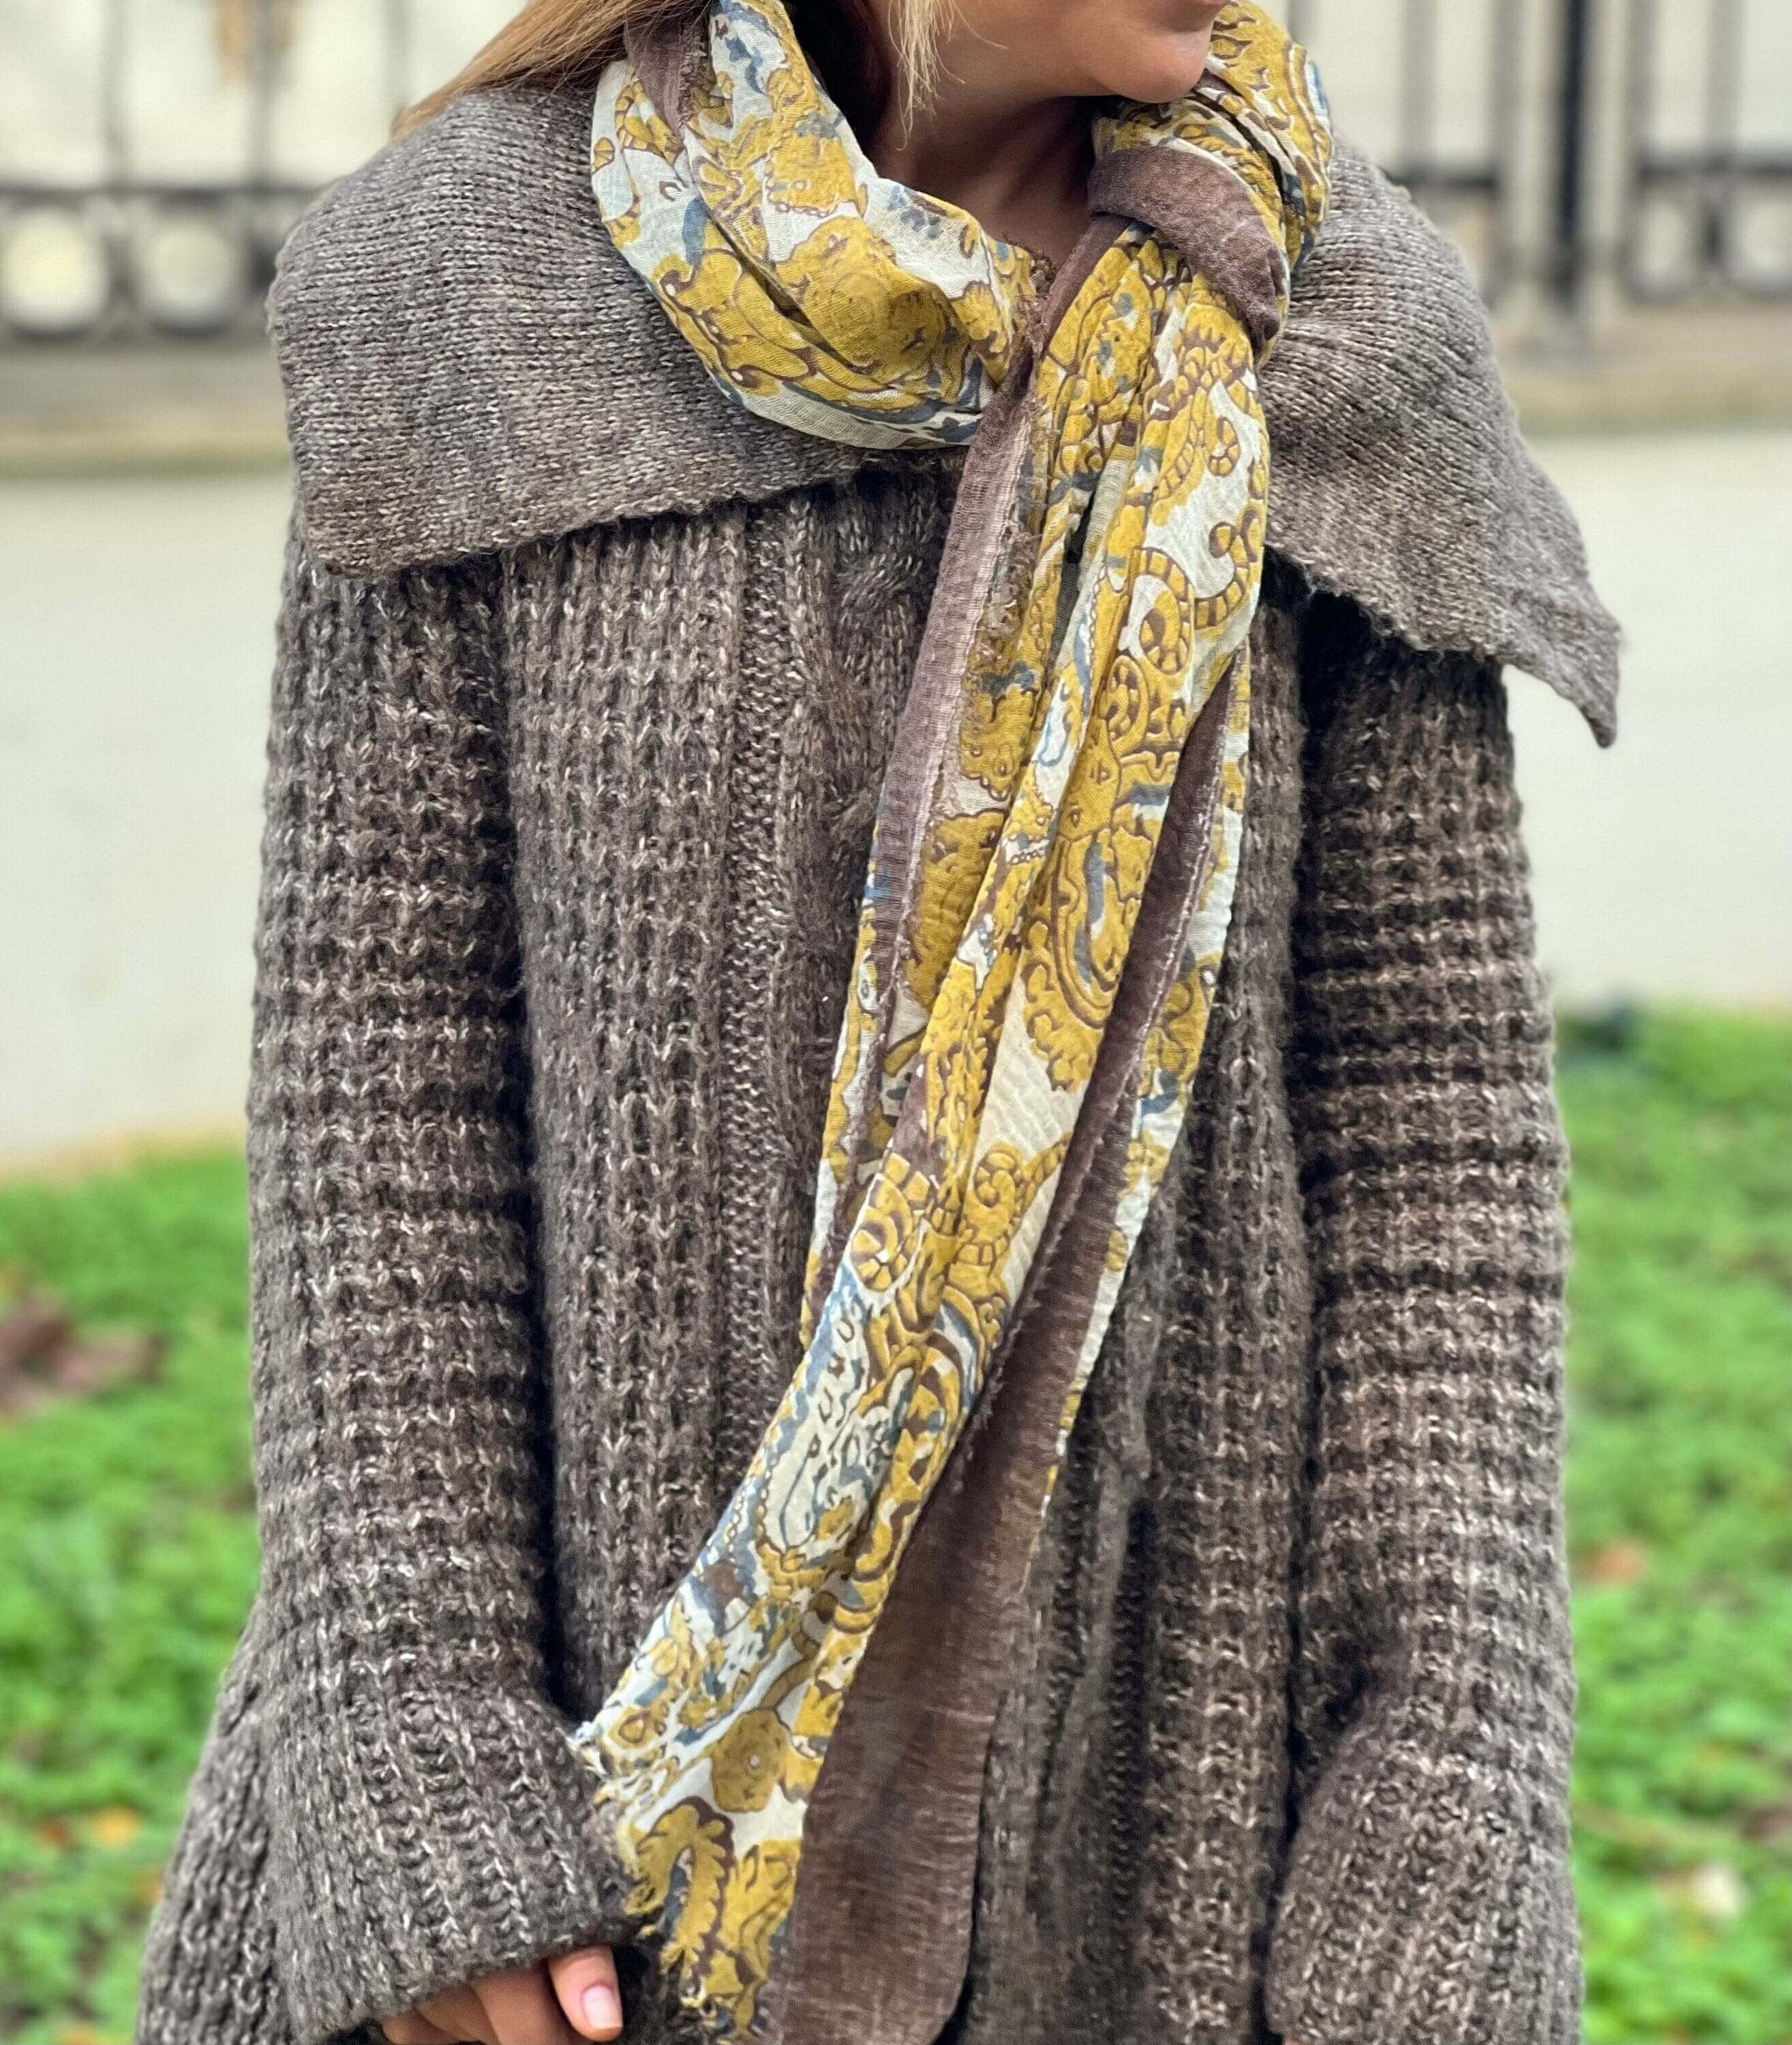 Going for a more festive look this autumn? Our autumn scarf is perfect for you! Featuring a colorful ethnic pattern, it will add a touch of beauty to your every day style!